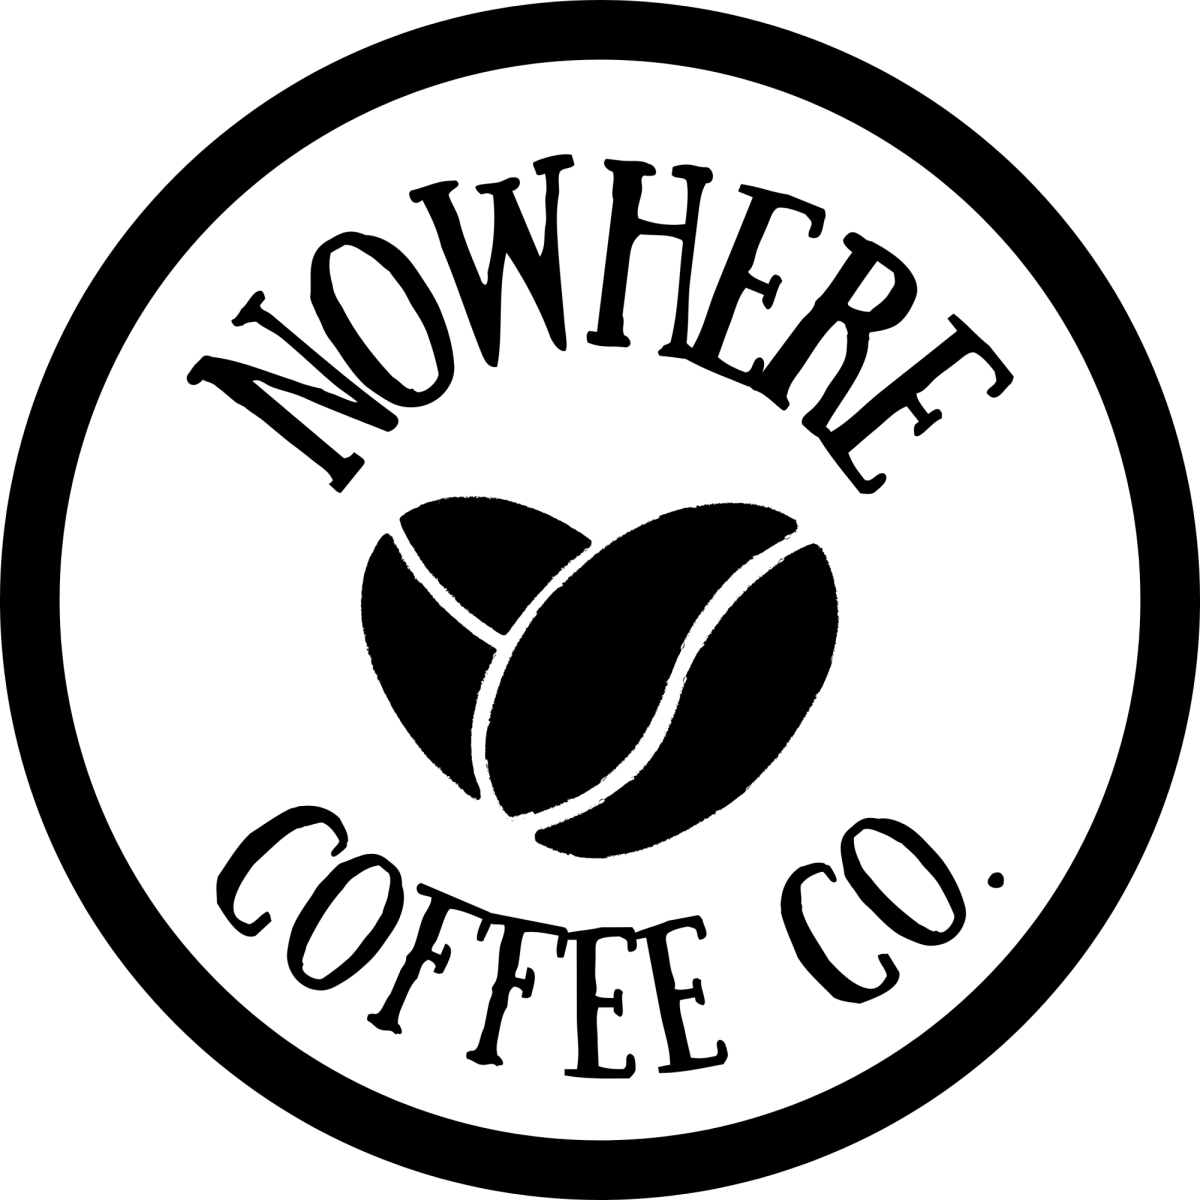 The+logo+of+Nowhere+Coffee+Co.+located+on+Tilghman+Street.